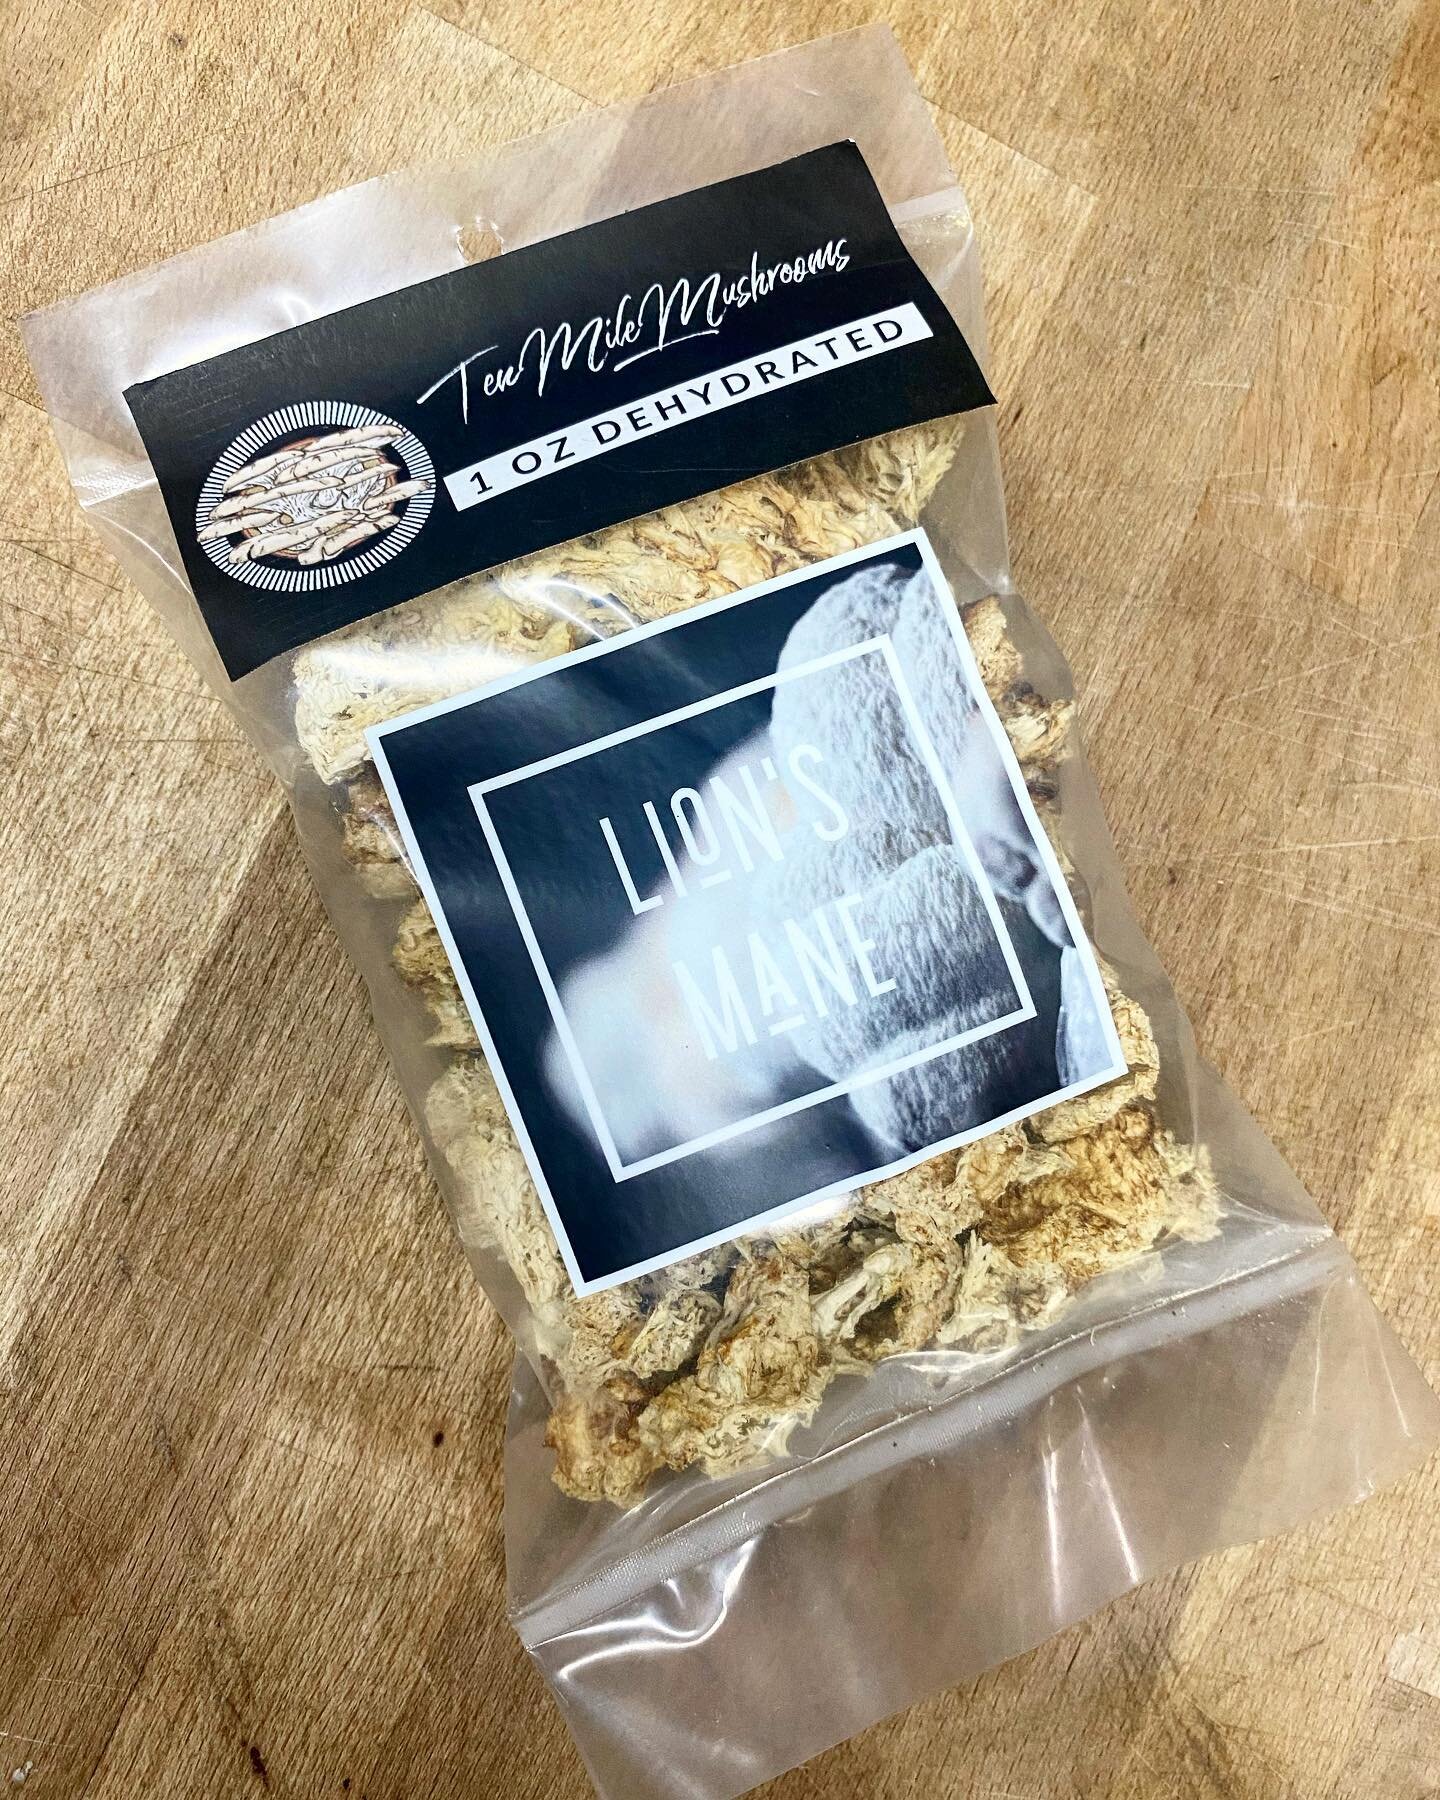 Don&rsquo;t forget we always have a plethora of dried mushrooms available on our website! 
Great for your soups, teas, and making your own tinctures...It&rsquo;s actually really amazing how well they reconstitute!